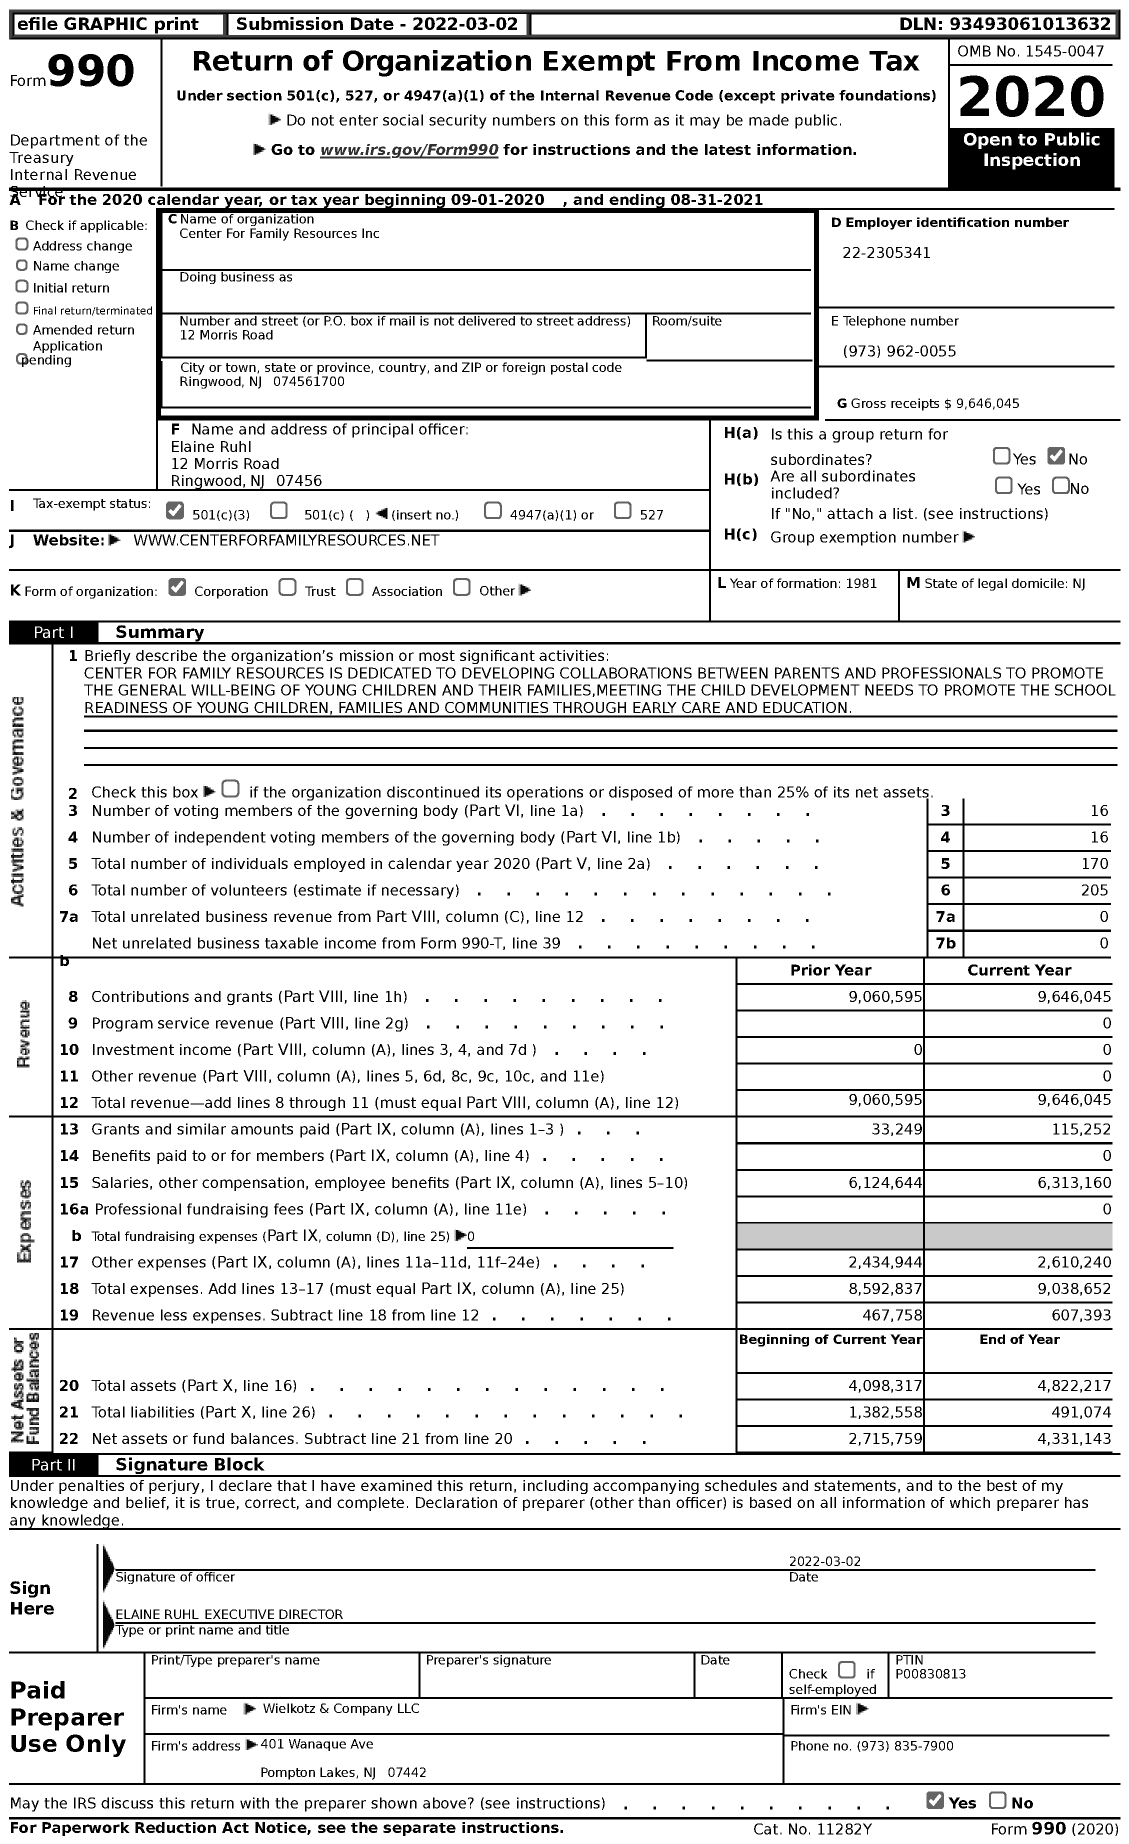 Image of first page of 2020 Form 990 for Center for Family Resources (CFR)